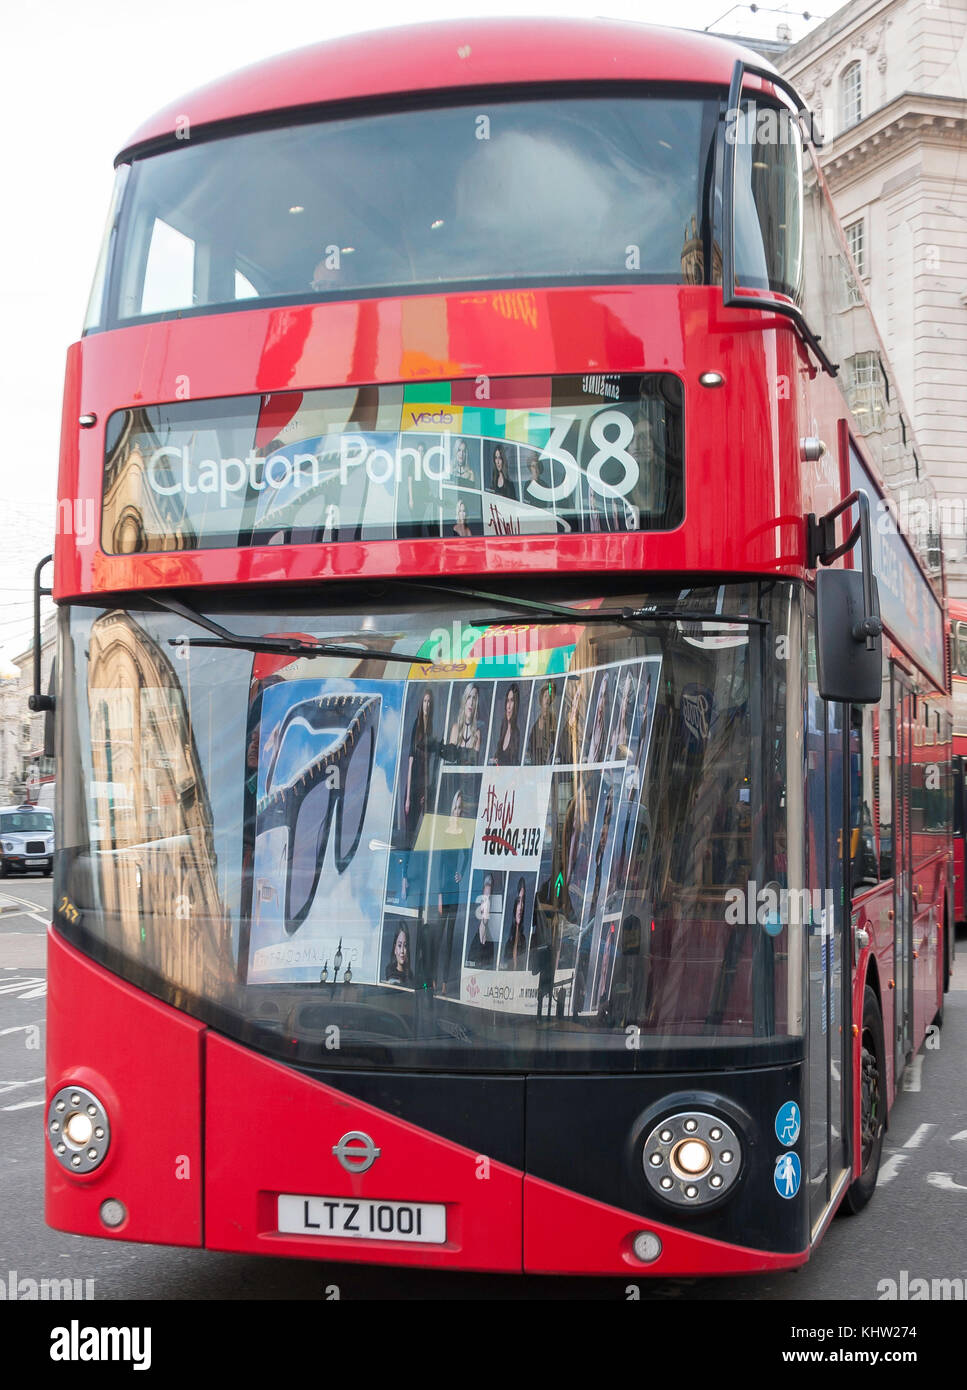 Clapton bus con insegna al neon riflessioni, Piccadilly Circus, Piccadilly, West End, la City of Westminster, Greater London, England, Regno Unito Foto Stock